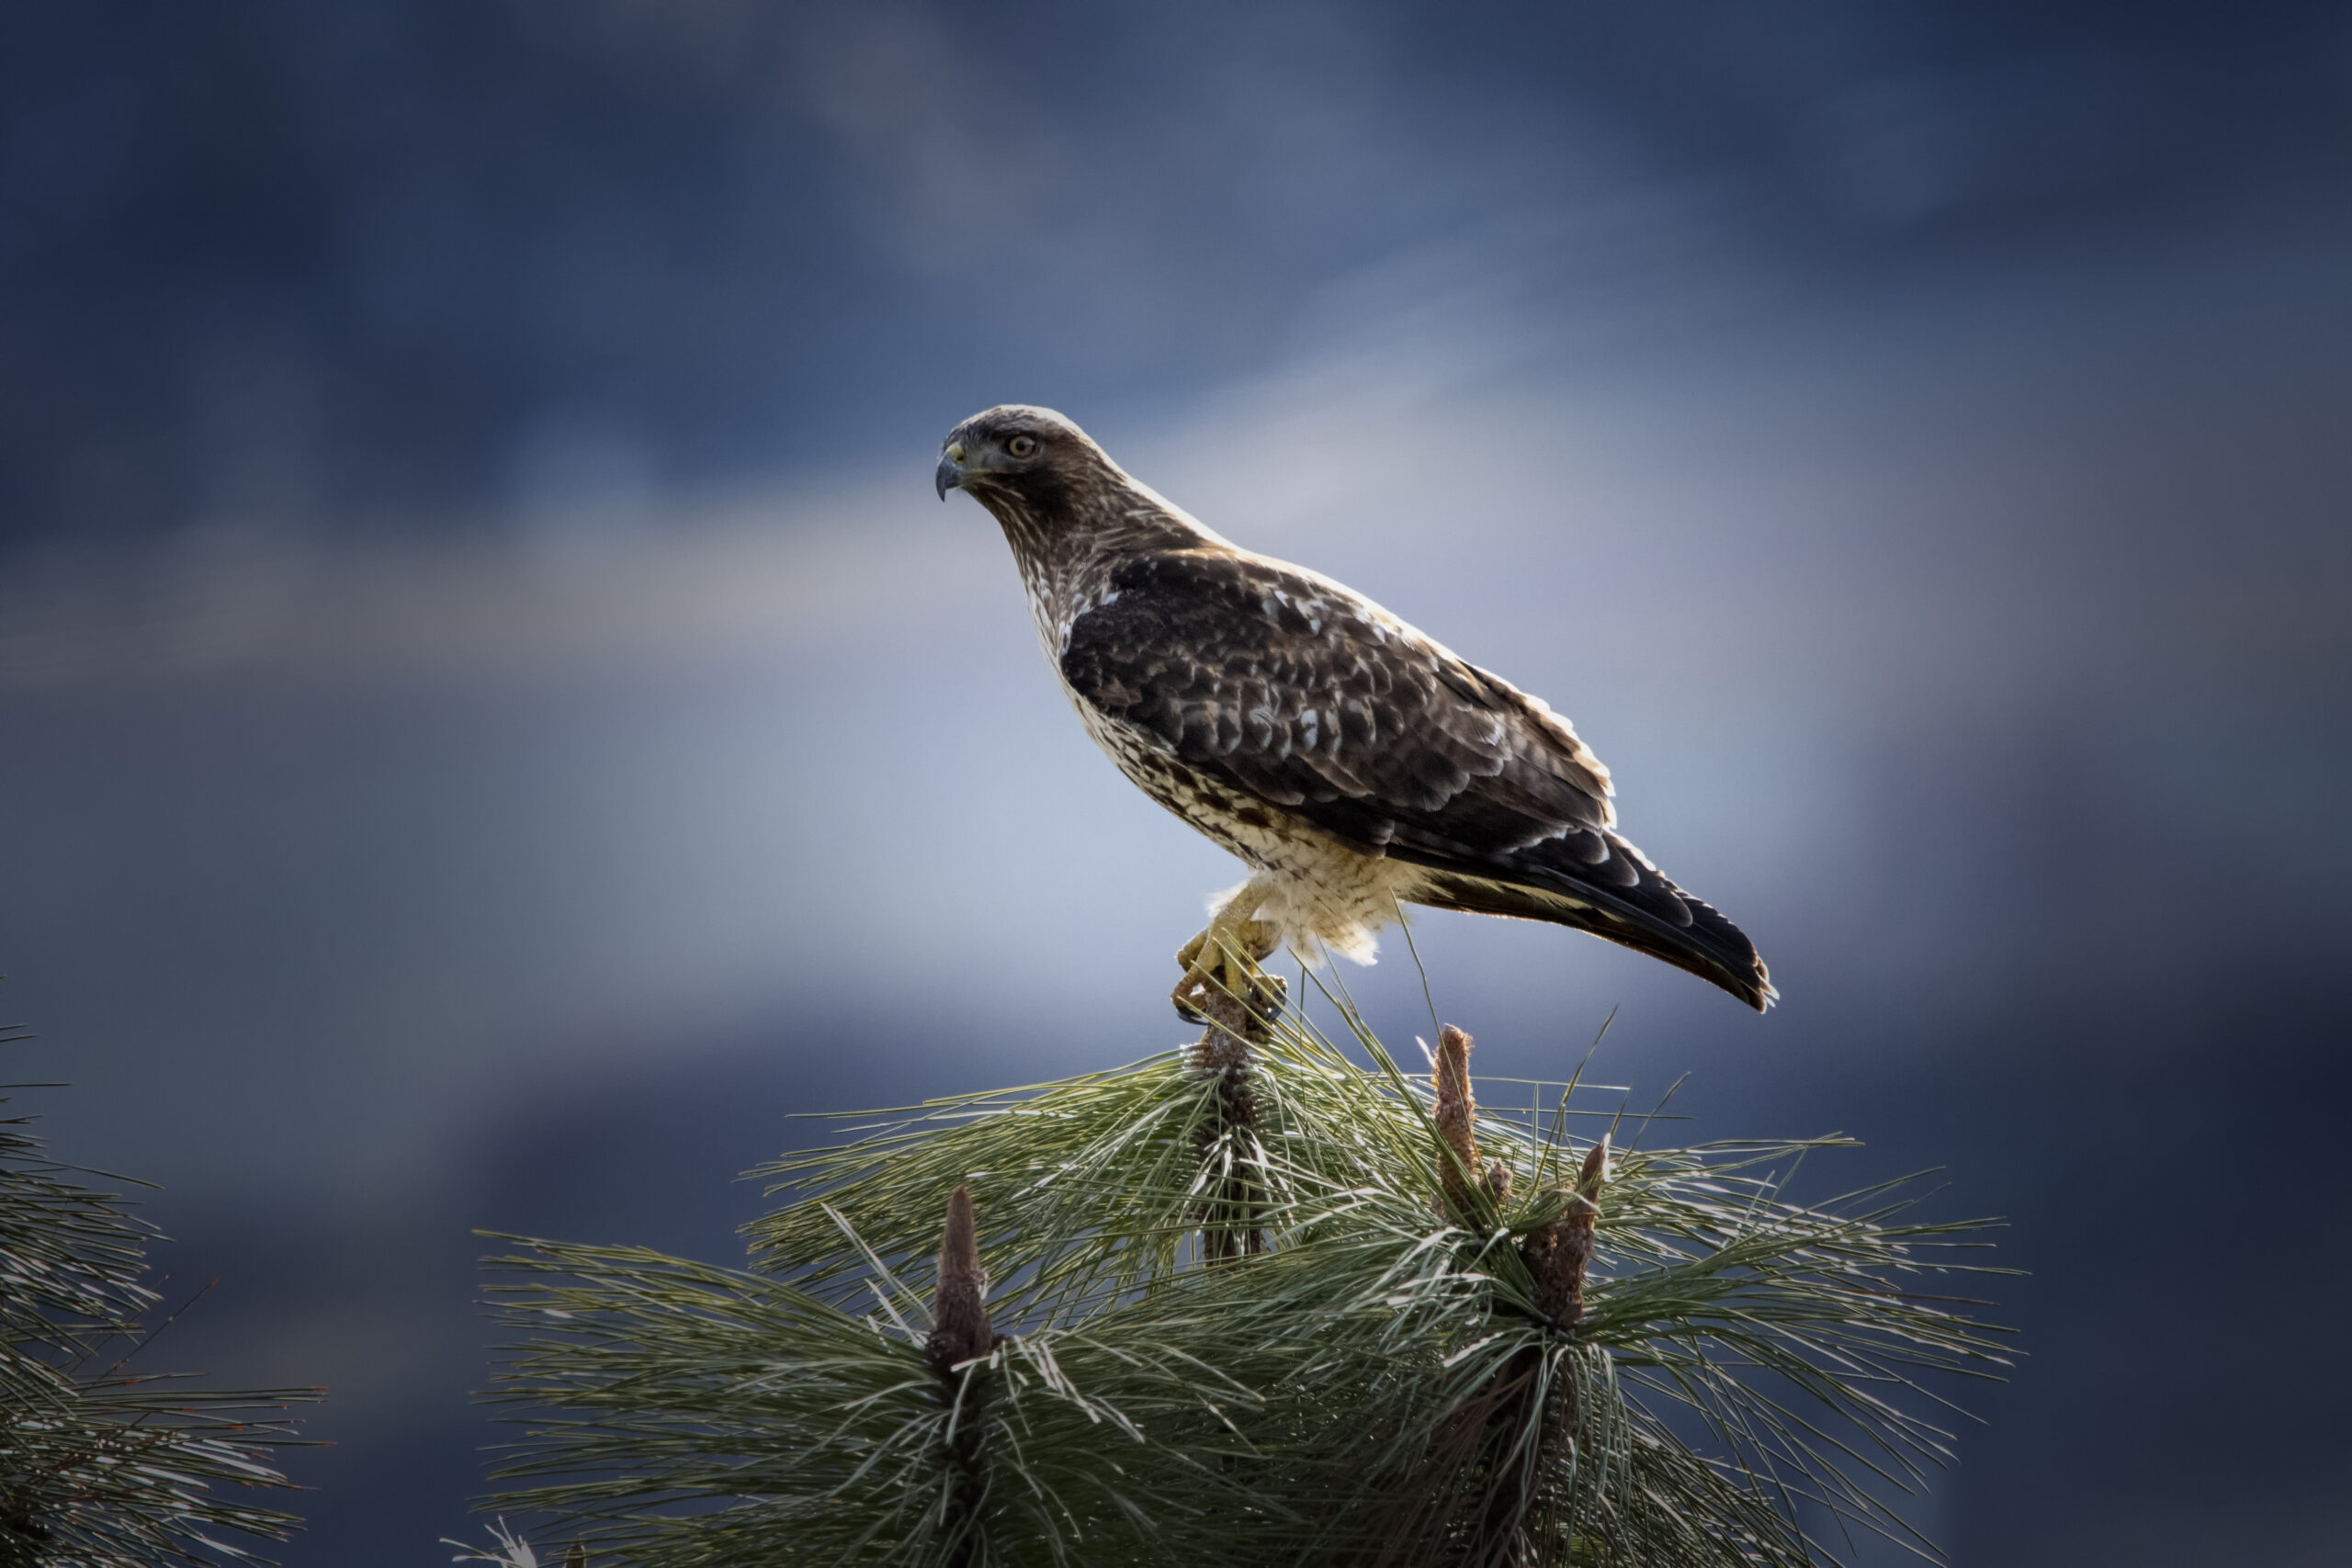 A red tailed hawk sits on a tree